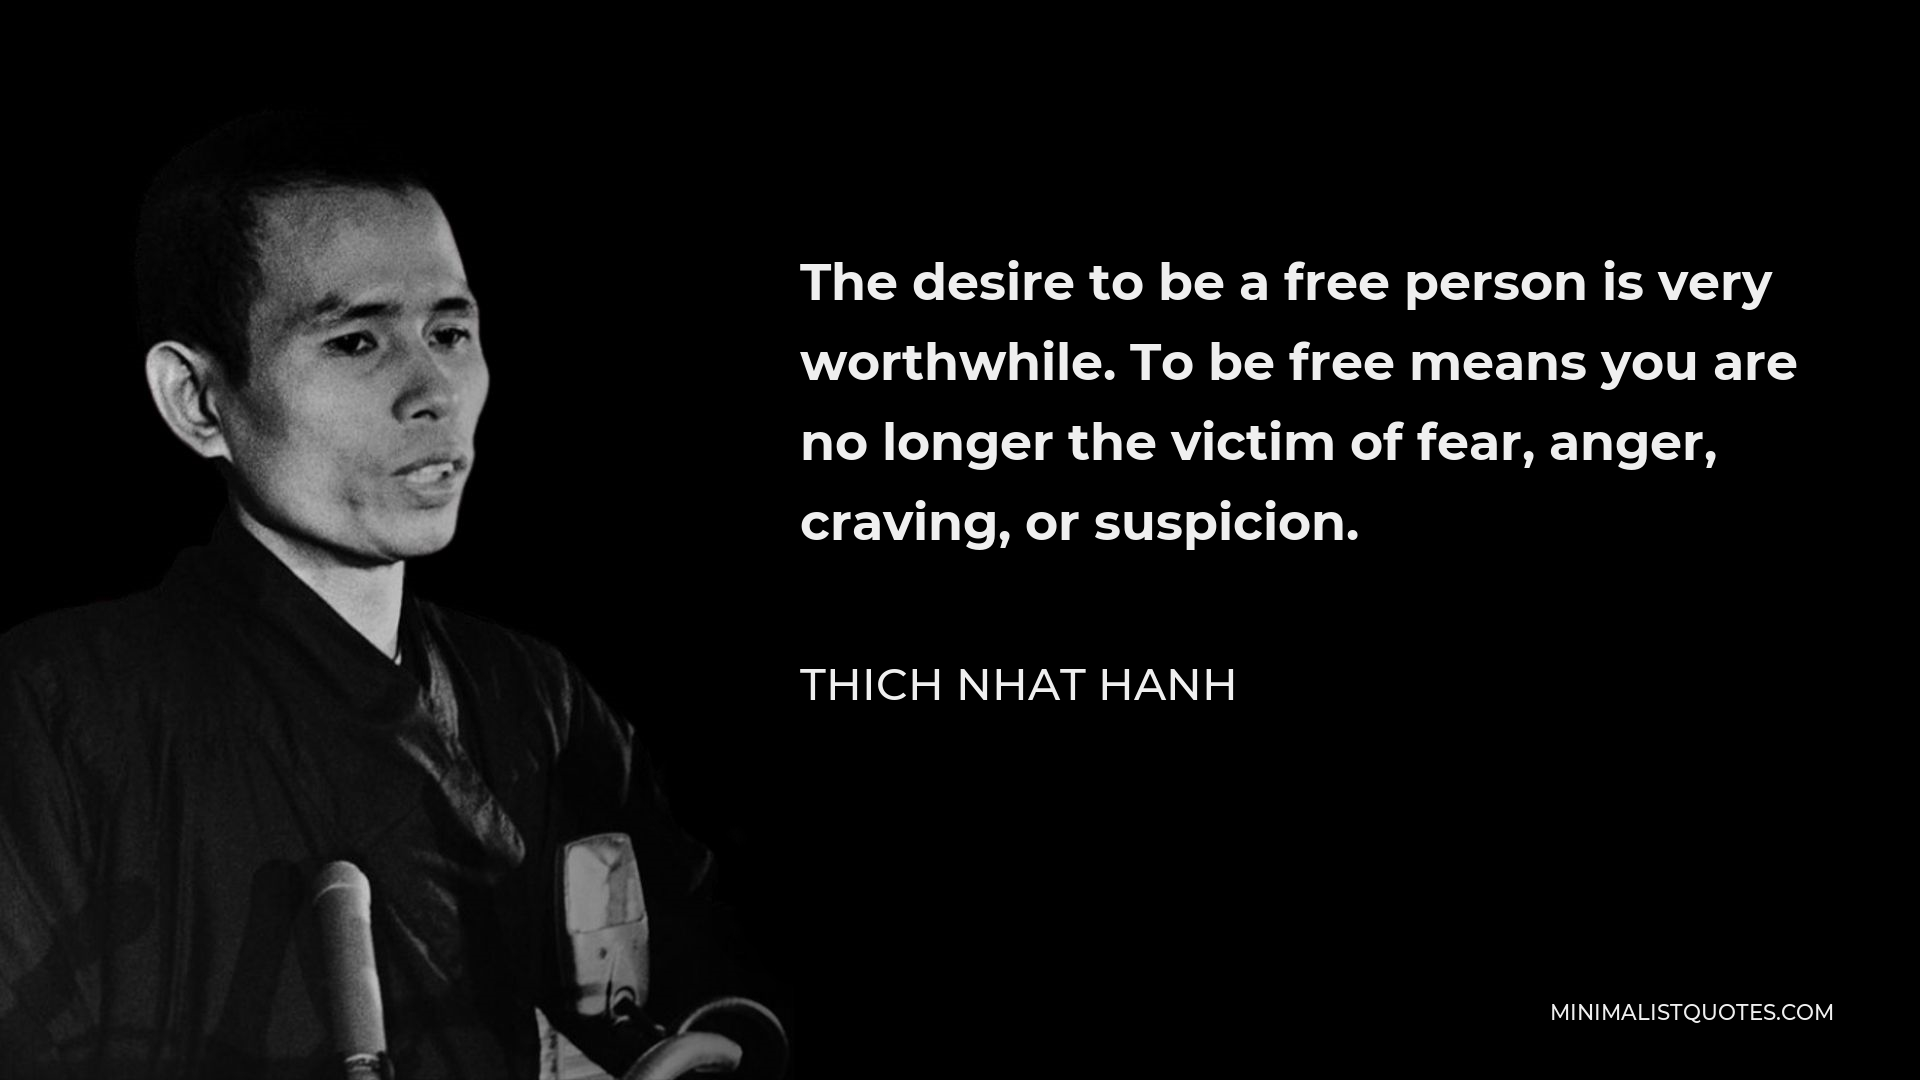 Thich Nhat Hanh Quote - The desire to be a free person is very worthwhile. To be free means you are no longer the victim of fear, anger, craving, or suspicion.